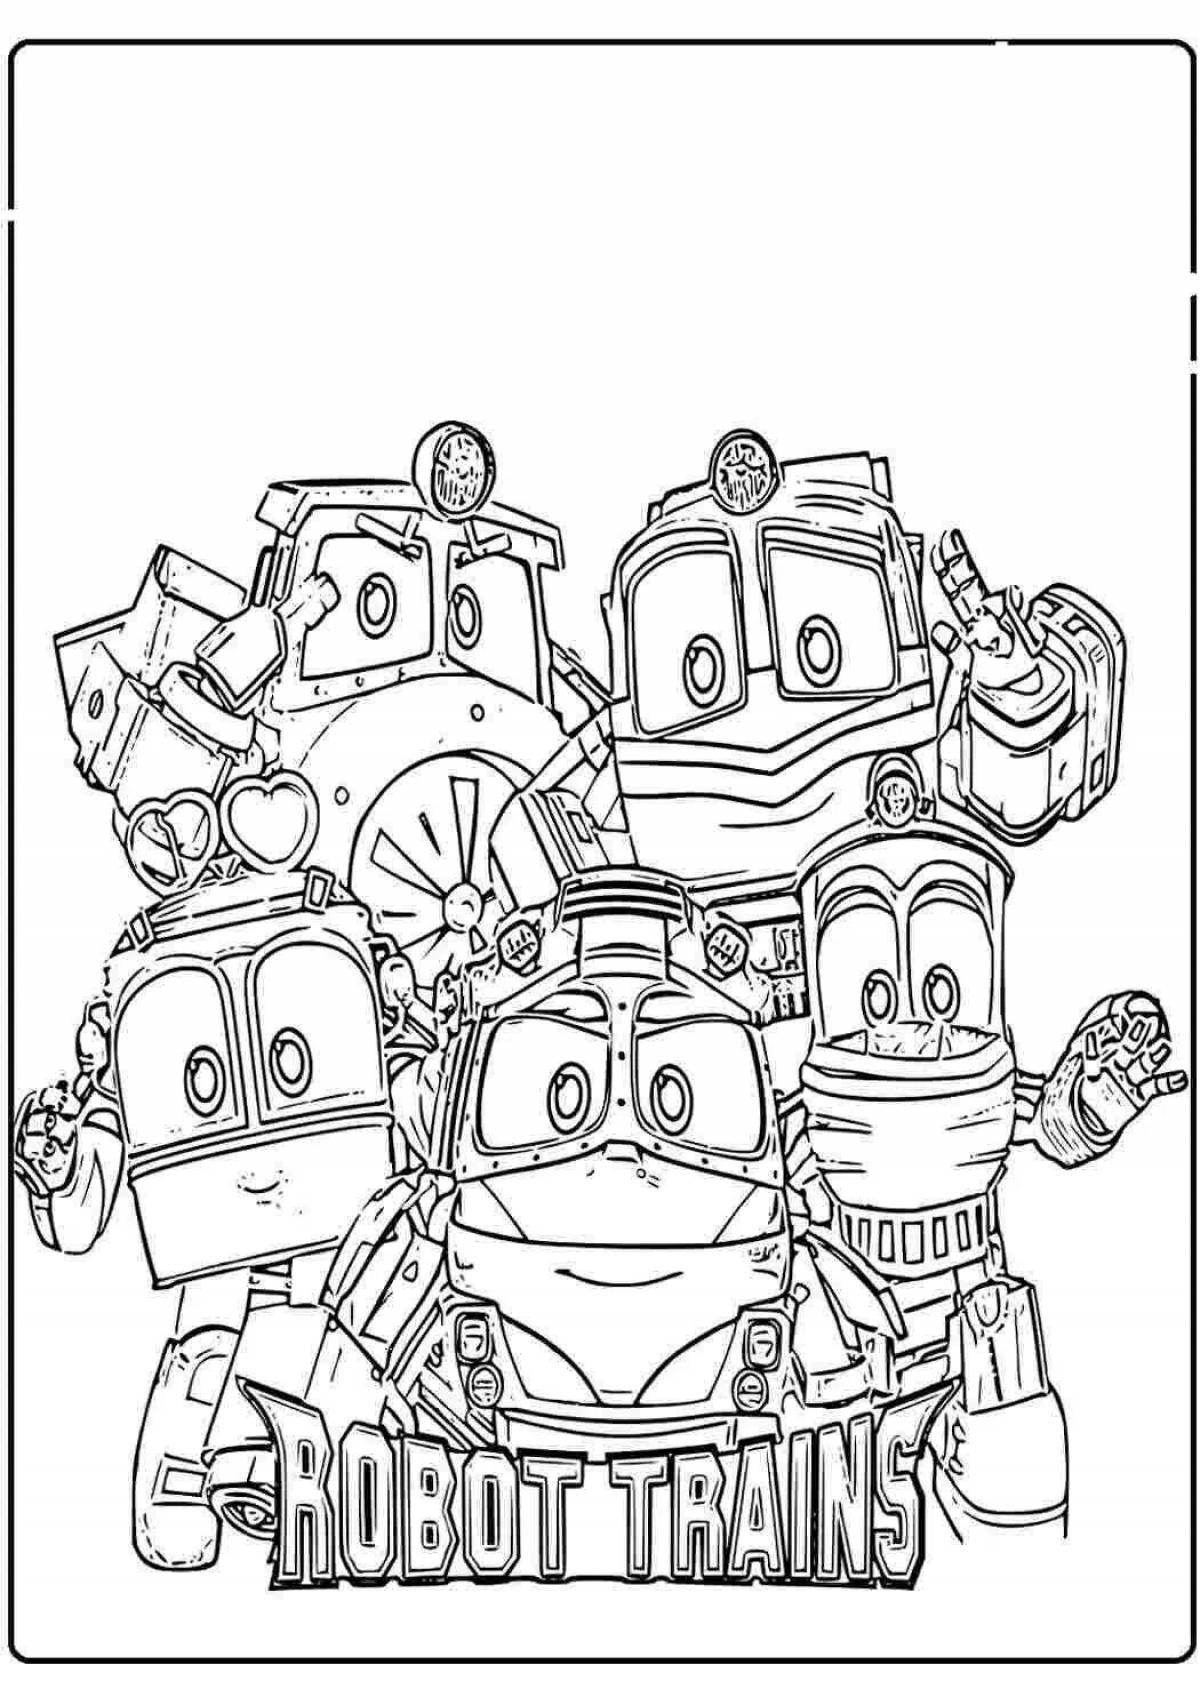 Charming victor train robots coloring book